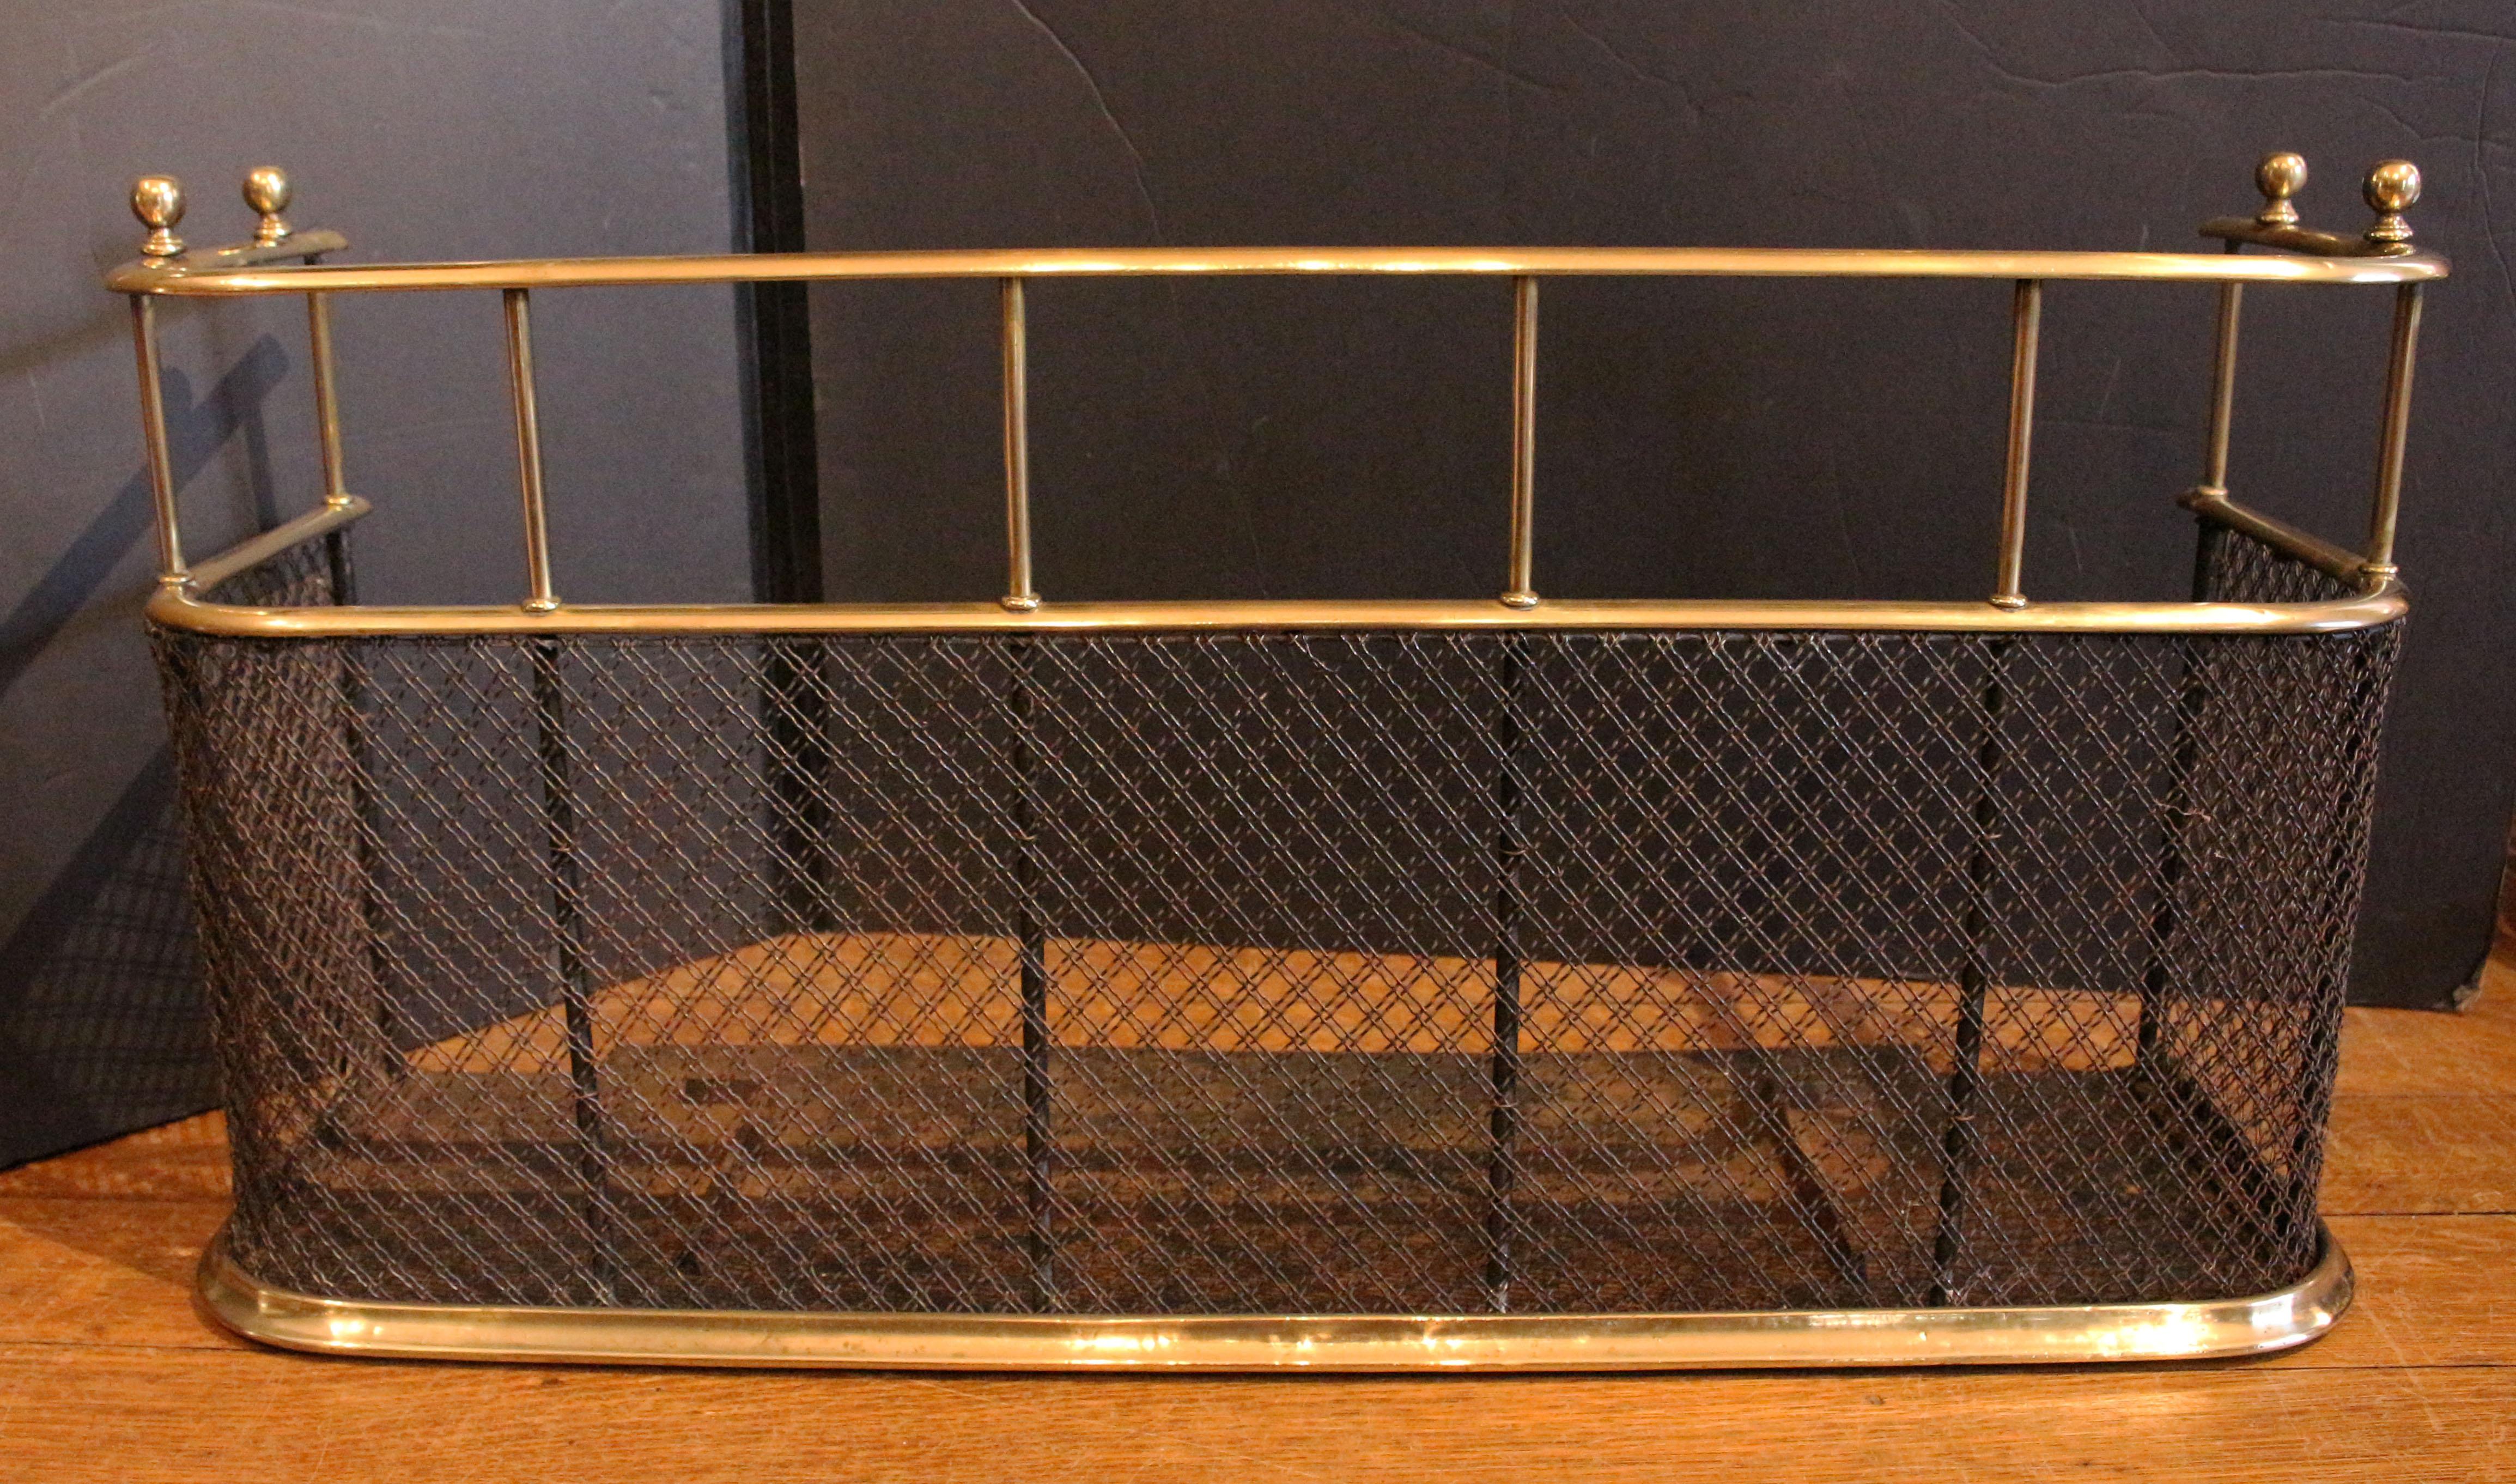 Mid-19th century English brass fire fender with double cross iron mesh. Integral tool rest stops at each end to hold tools in place. Often this taller form which completely surrounds the fire is called a nursery guard or nursery fender. Iron hearth